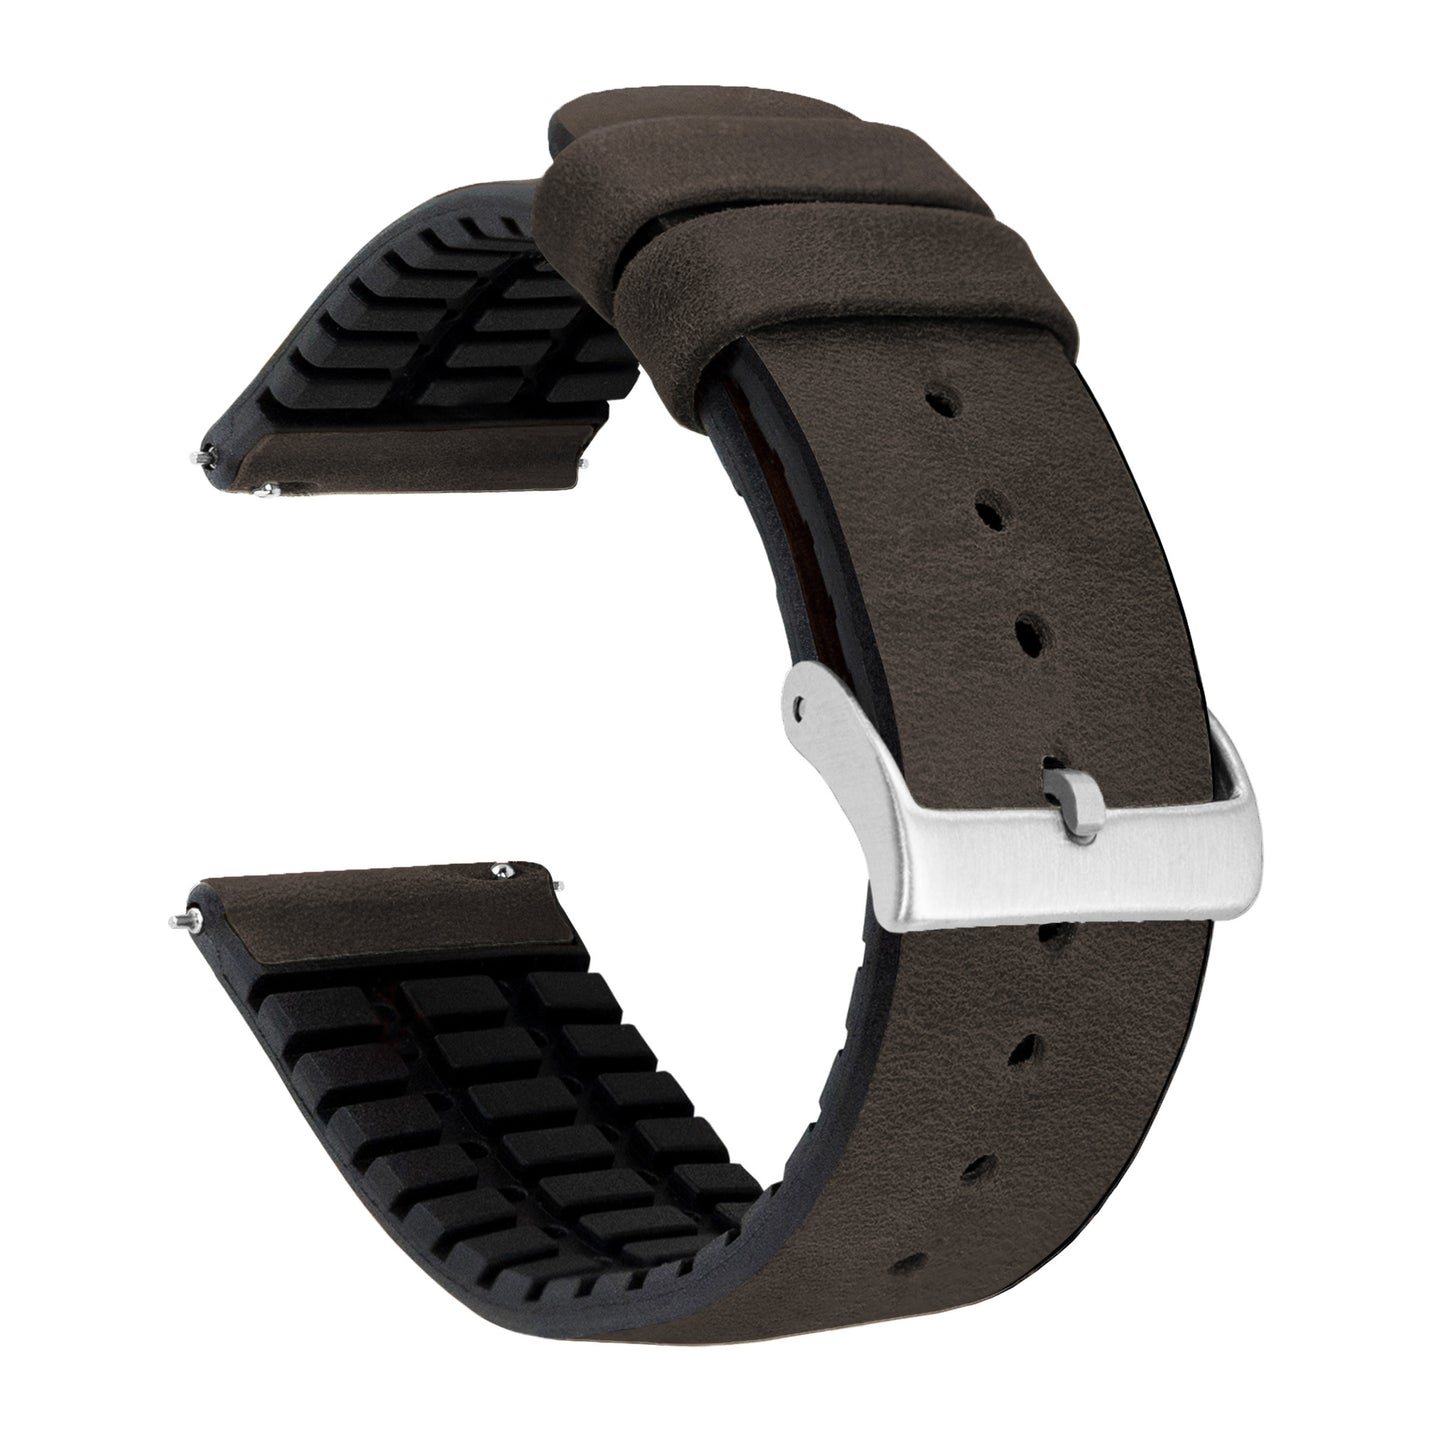 Gear Sport | Leather and Rubber Hybrid | Smoke Brown - Barton Watch Bands